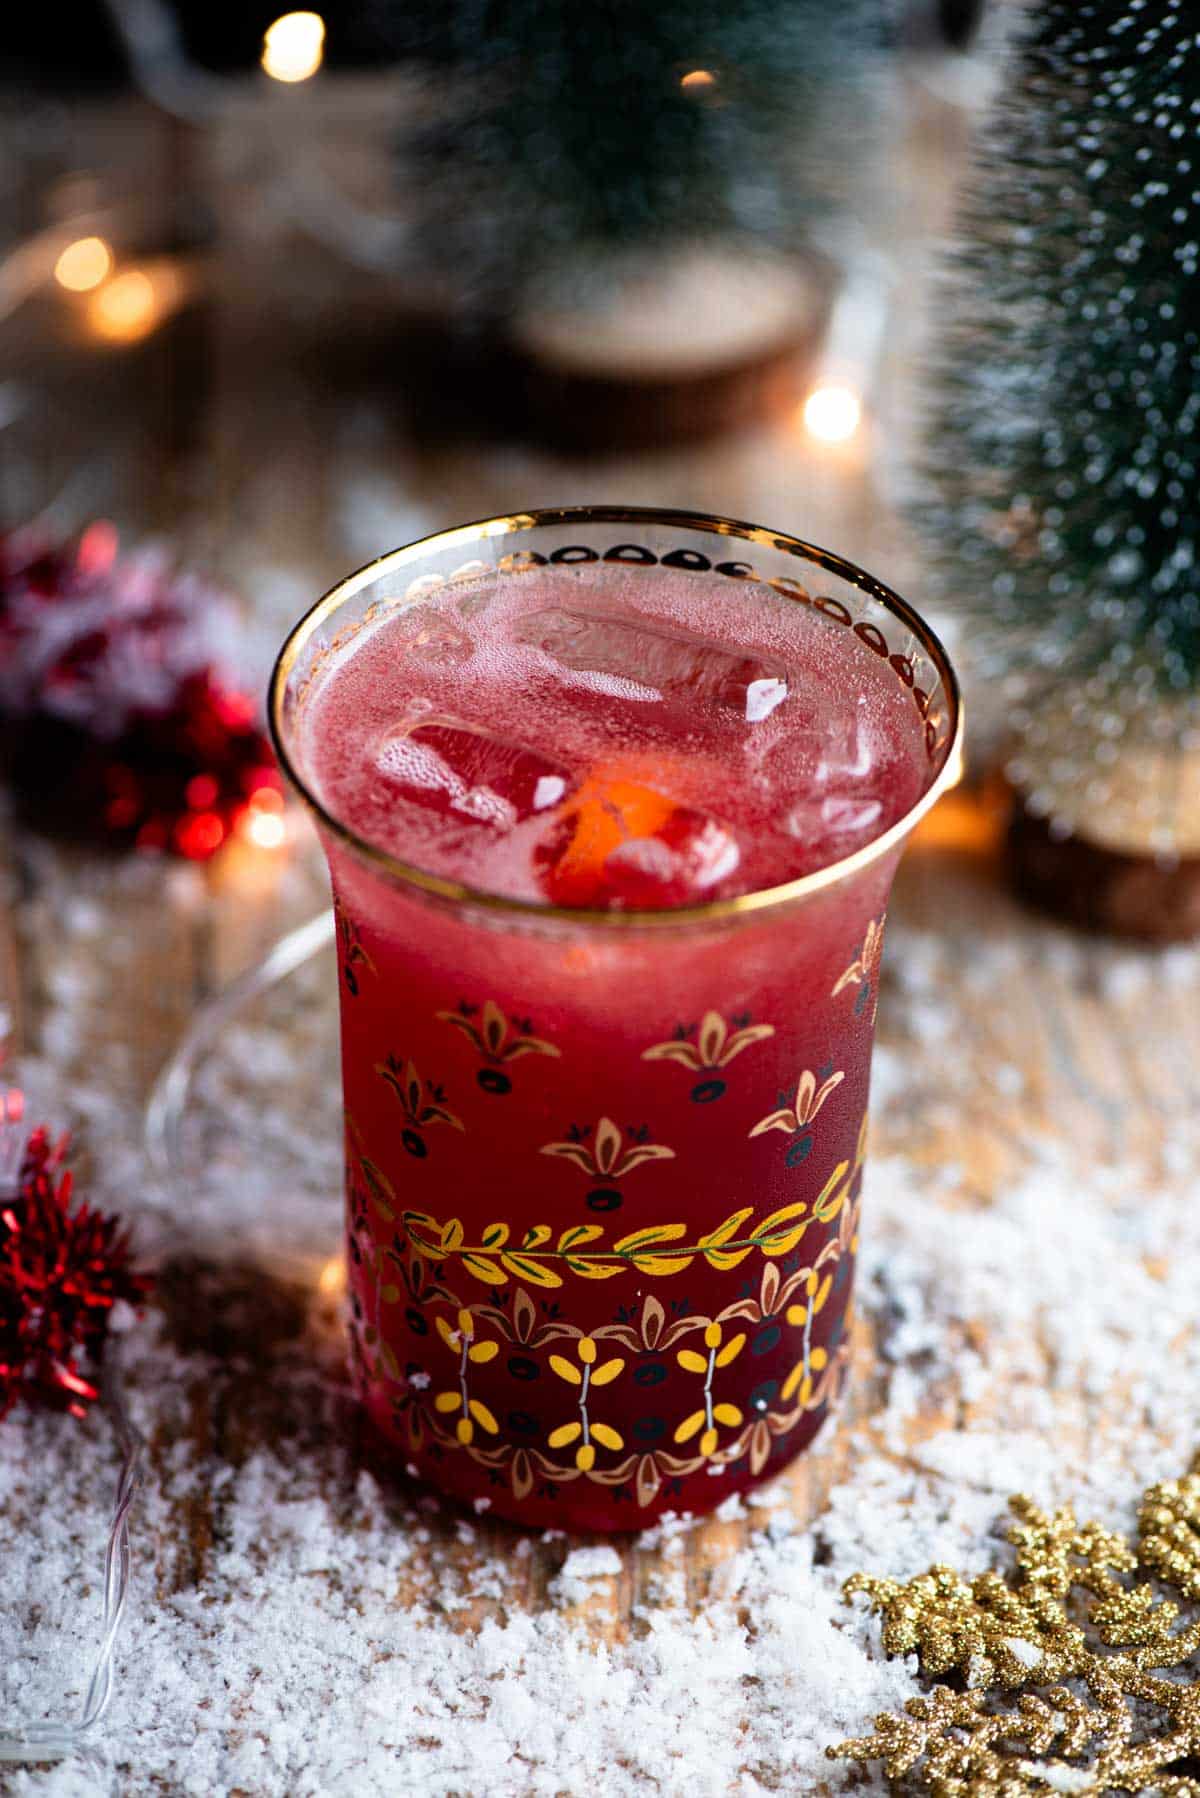 A close up of a Cranberry and Prosecco cocktail in a glass with snow and Christmas decorations all around.